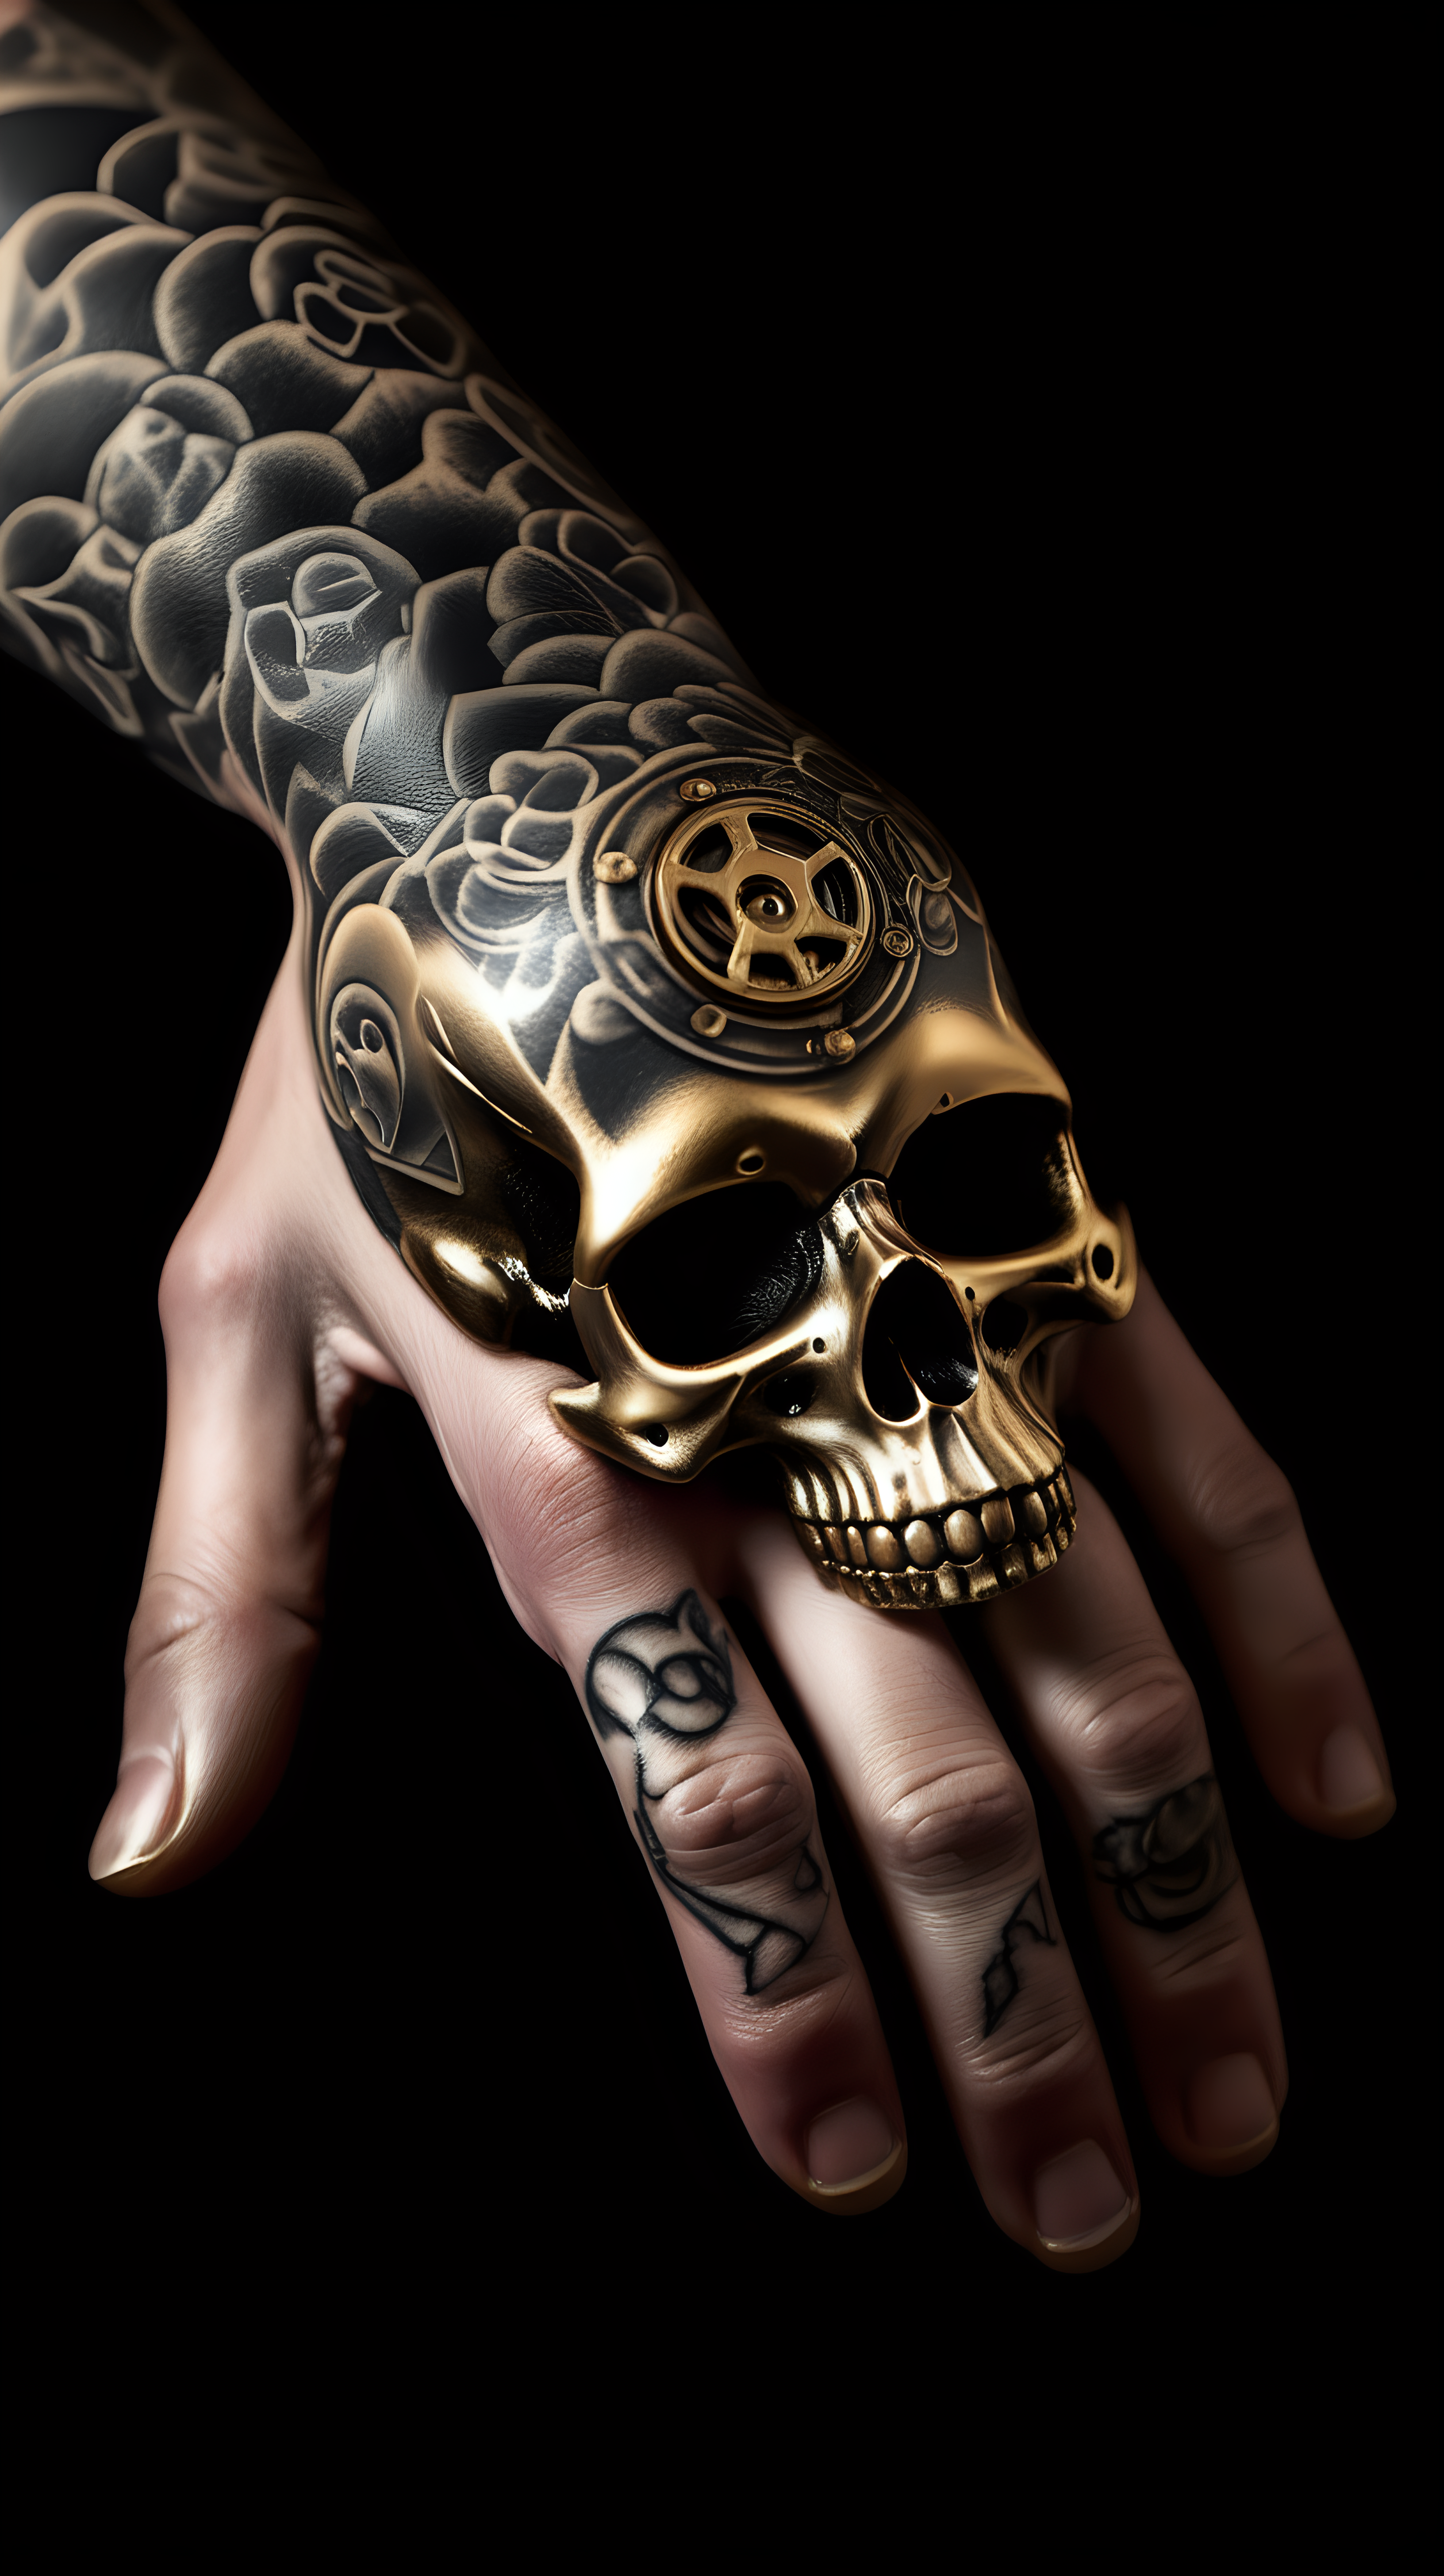 /imagine prompt : An ultra-realistic photograph captured with a canon 5d mark III camera, equipped with an macro lens at F 5.8 aperture setting, capturing a vintage classic tattoo machine ,a pattern of the skull is engraved on it's golden grip , grabbed by a hand wearing black nitrile gloves.
the hand is blurred and the focus sets on tattoogun's grip.
Soft spot light gracefully illuminates the subject and golden grip is shining. The background is absolutely black , highlighting the subject.
The image, shot in high resolution and a 16:9 aspect ratio, captures the subject’s  with stunning realism –ar 9:16 –v 5.2 –style raw
